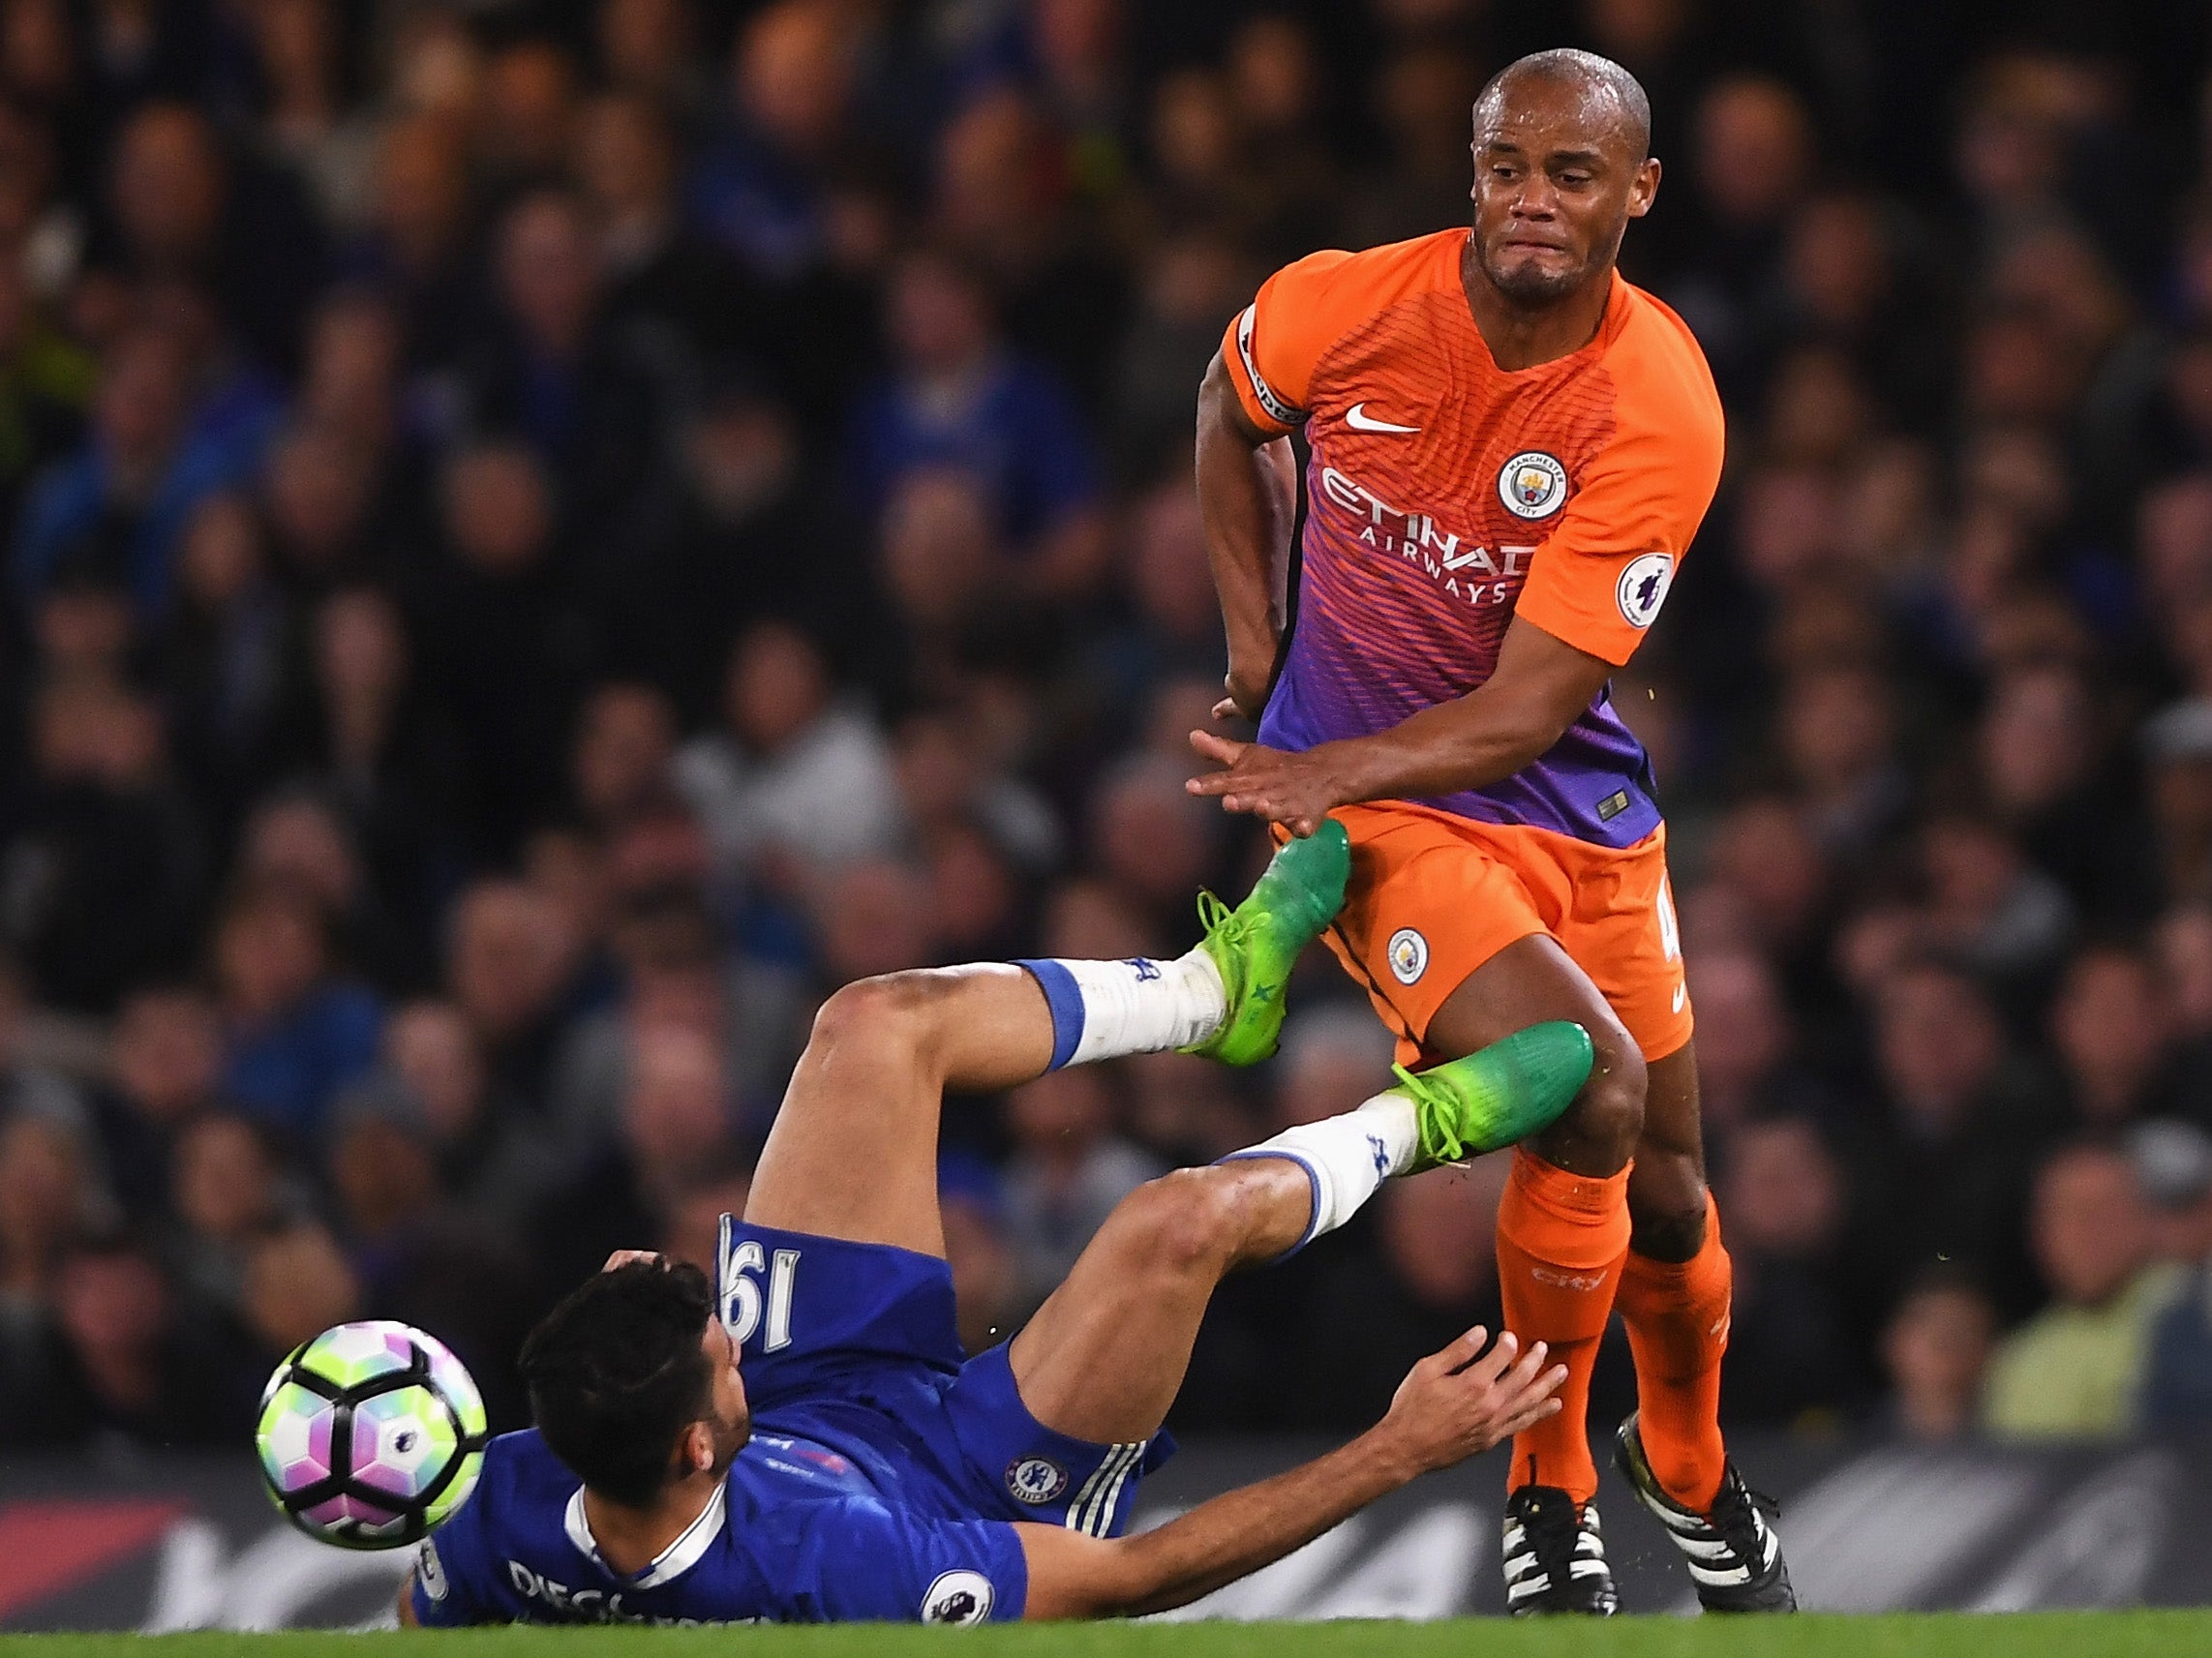 Costa appeared to kick out at Kompany after a challenge